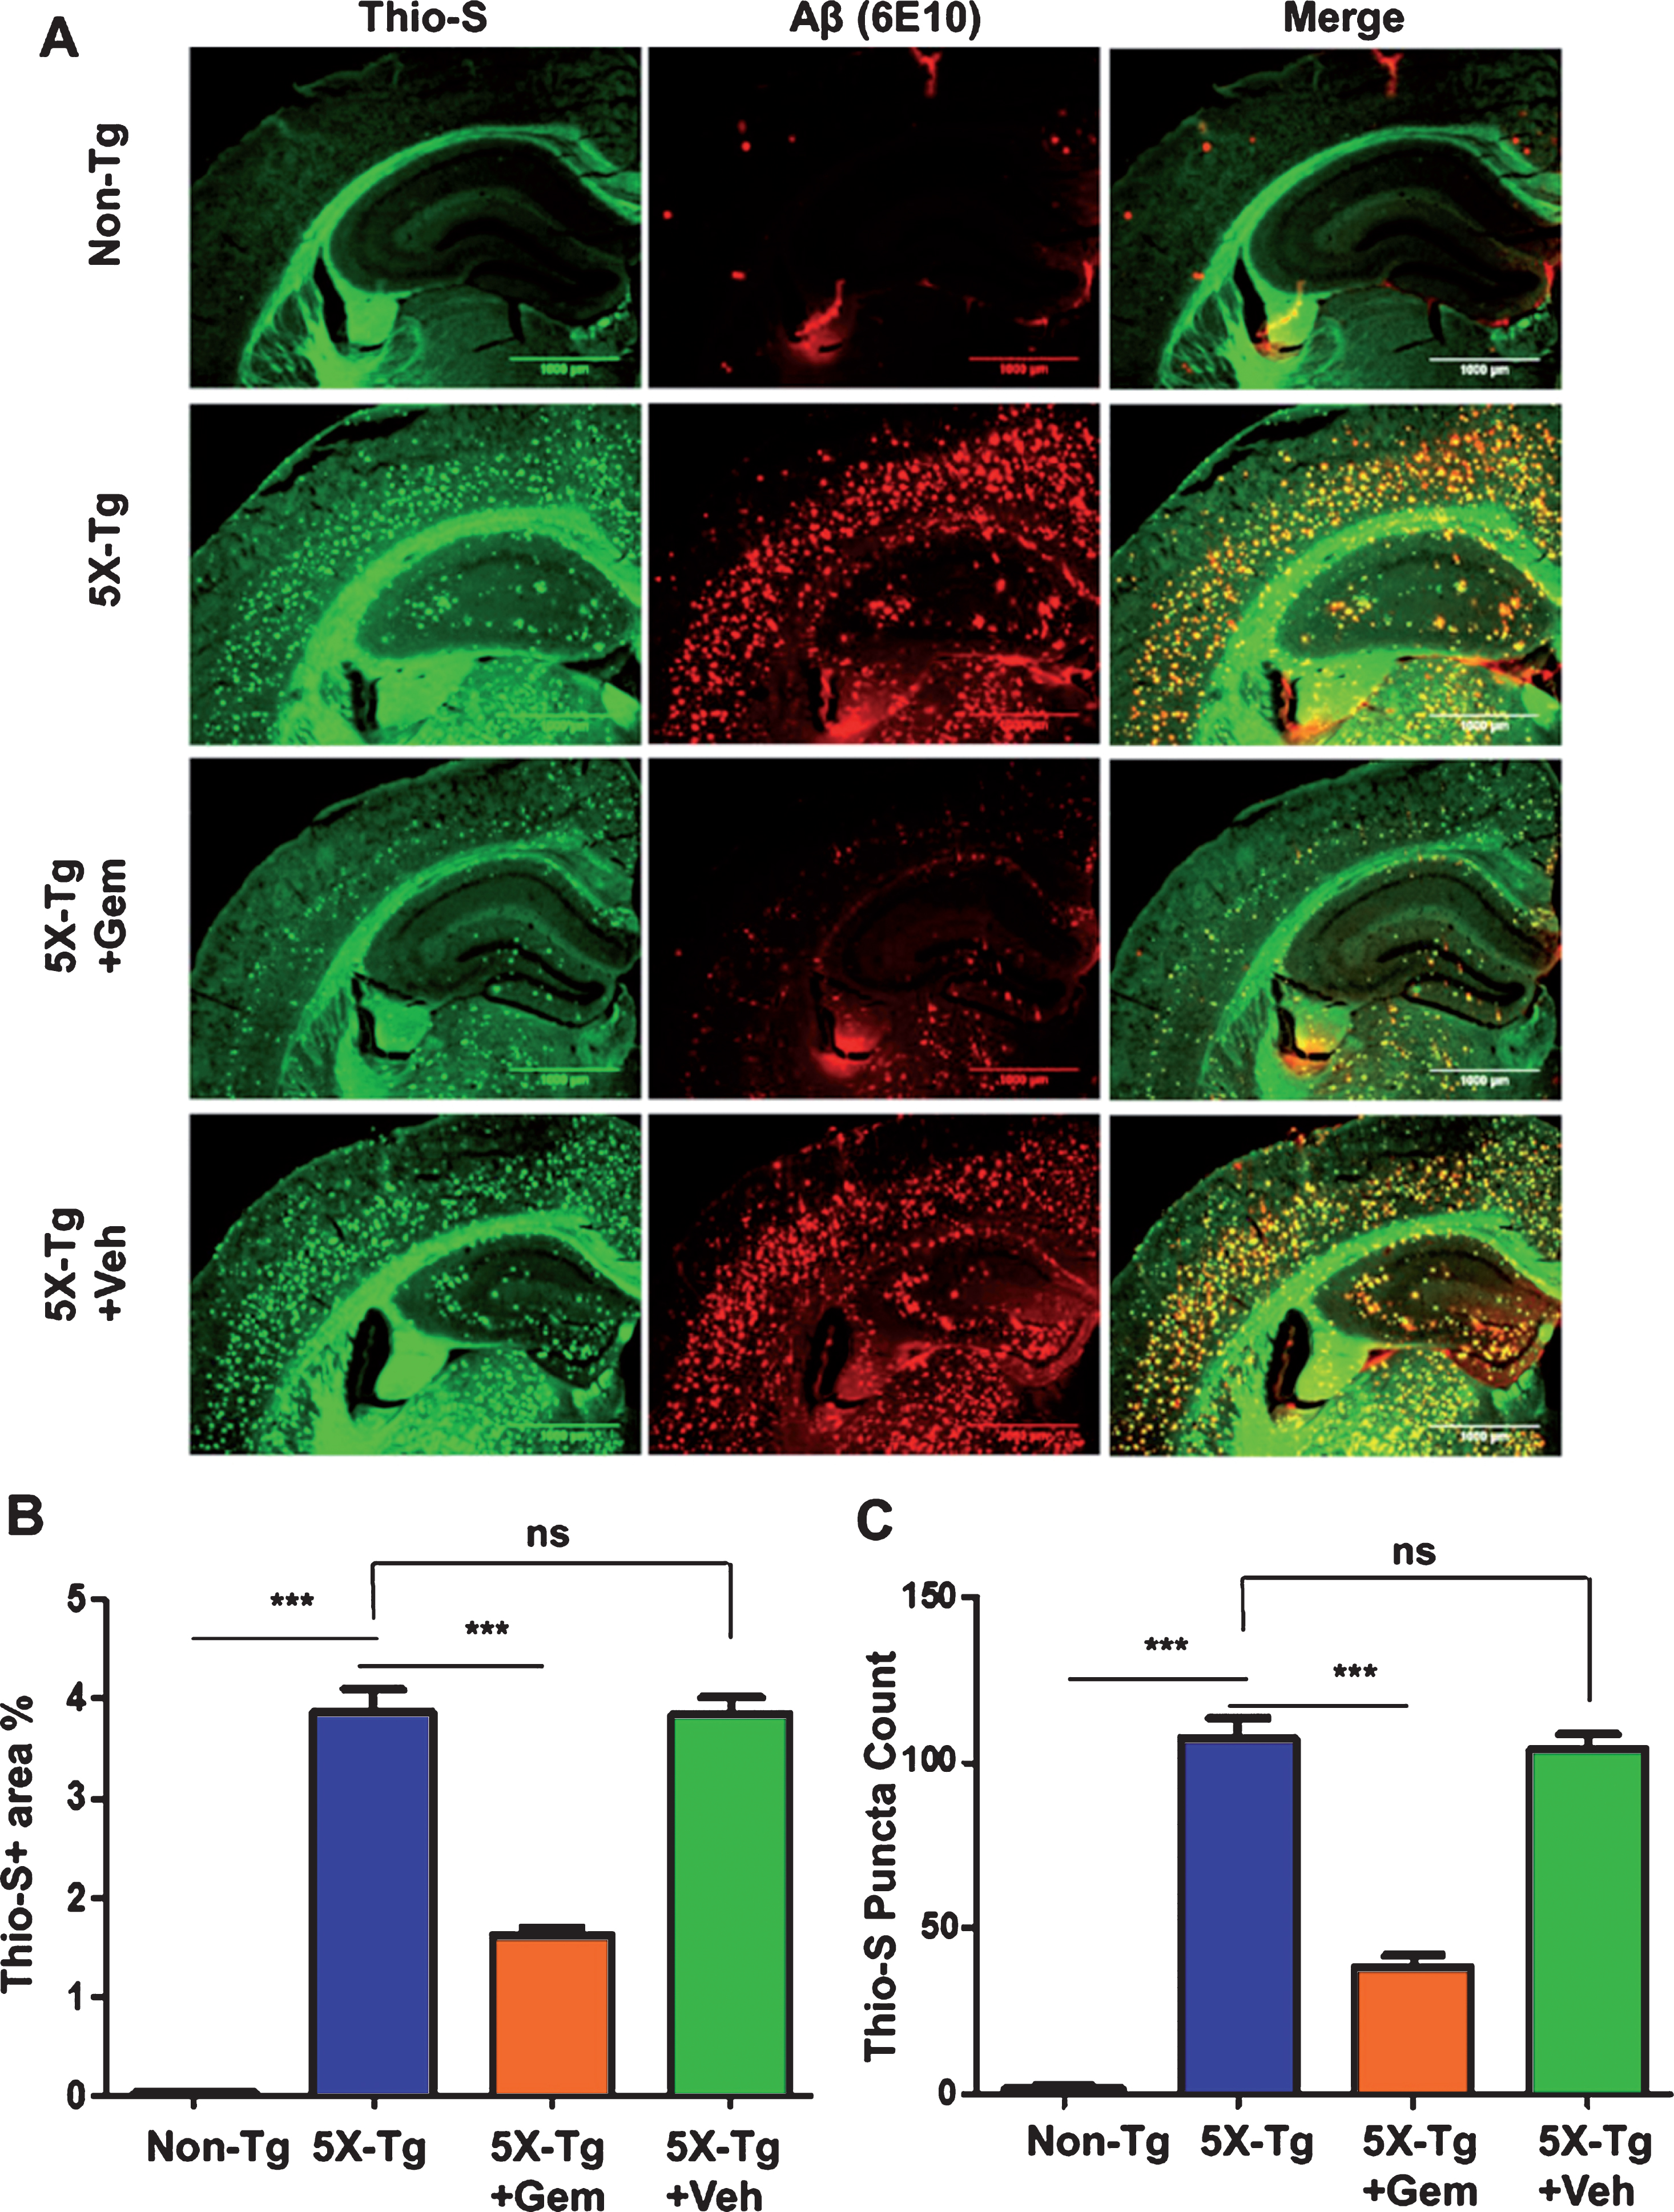 Gemfibrozil treatment reduces Aβ plaque burden in the hippocampus of 5XFAD mouse model of AD. Six-month-old 5XFAD mice (n = 6) were treated with gemfibrozil (7.5 mg/kg/day) or vehicle (0.1% methylcellulose) for 1 month followed by (A) double labeling of free-floating hippocampal sections with thioflavin-S (Green) and 6E10 antibody (Red). Scale bar = 1000μm. Characterization of plaques by analyzing (B) Thio-S positive area percentage and (C) Thio-S puncta count. All data are represented as mean±SEM. One way ANOVA followed by Tukey’s multiple comparison test was used for statistical analysis;  *p <  0.05,  **p <  0.01,  ***p <  0.001.